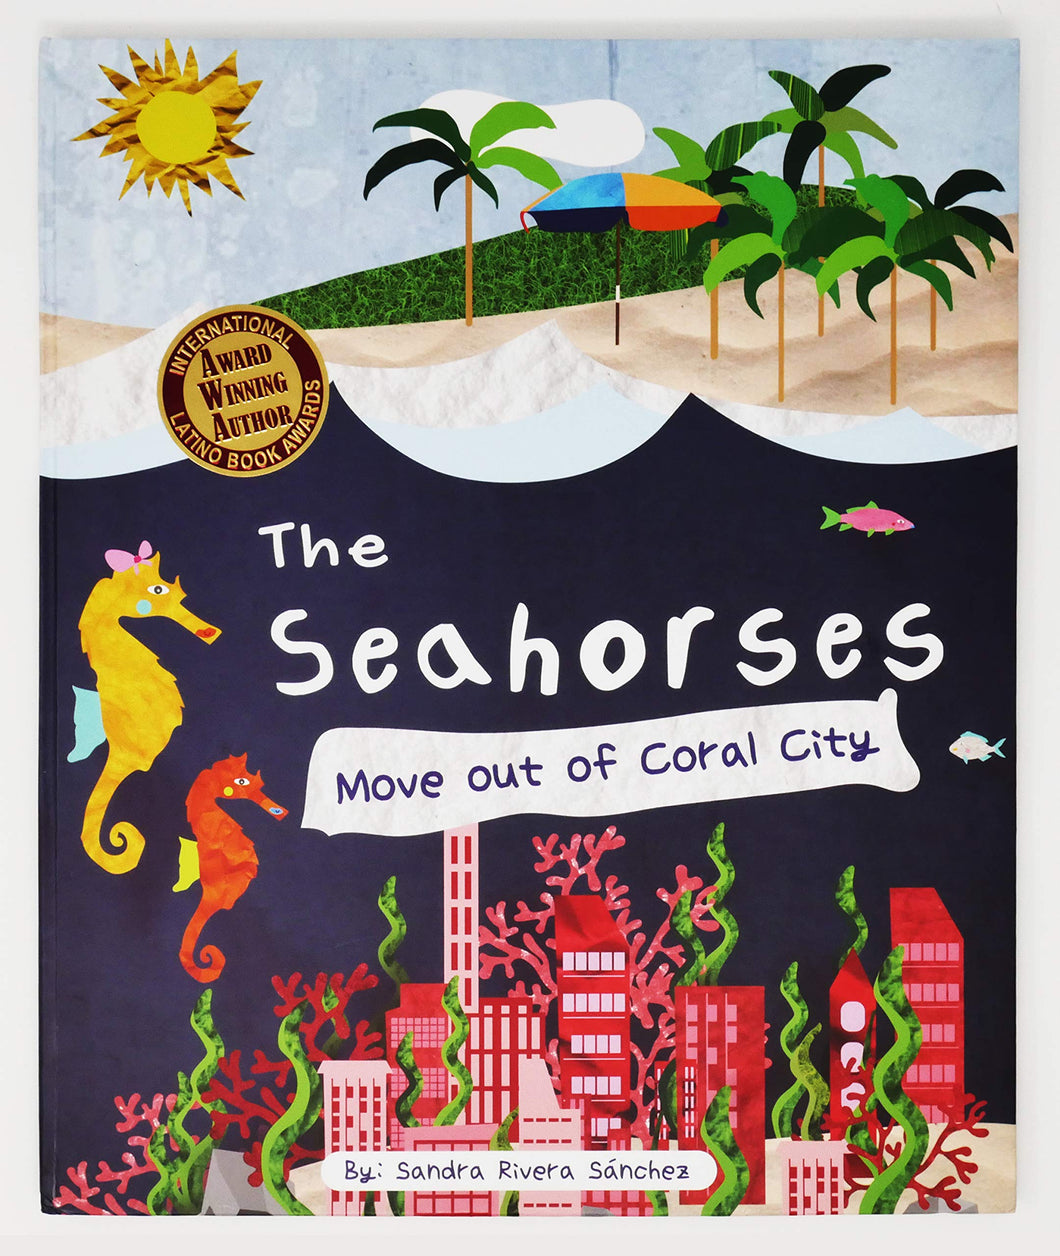 The seahorses move out of Coral City